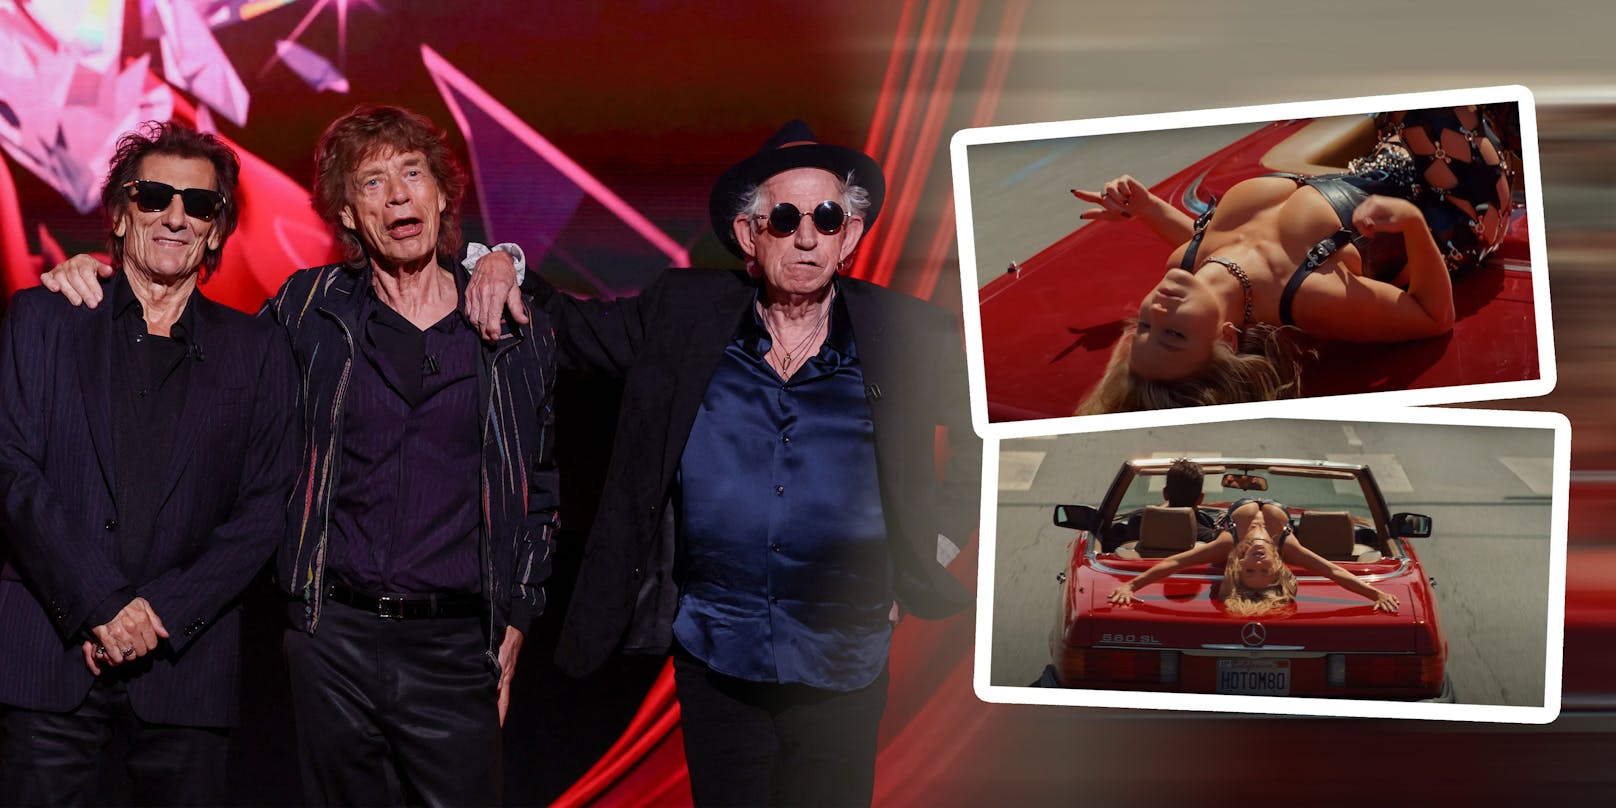 Heißes Video, neues Album – Rolling Stones sind "Angry"